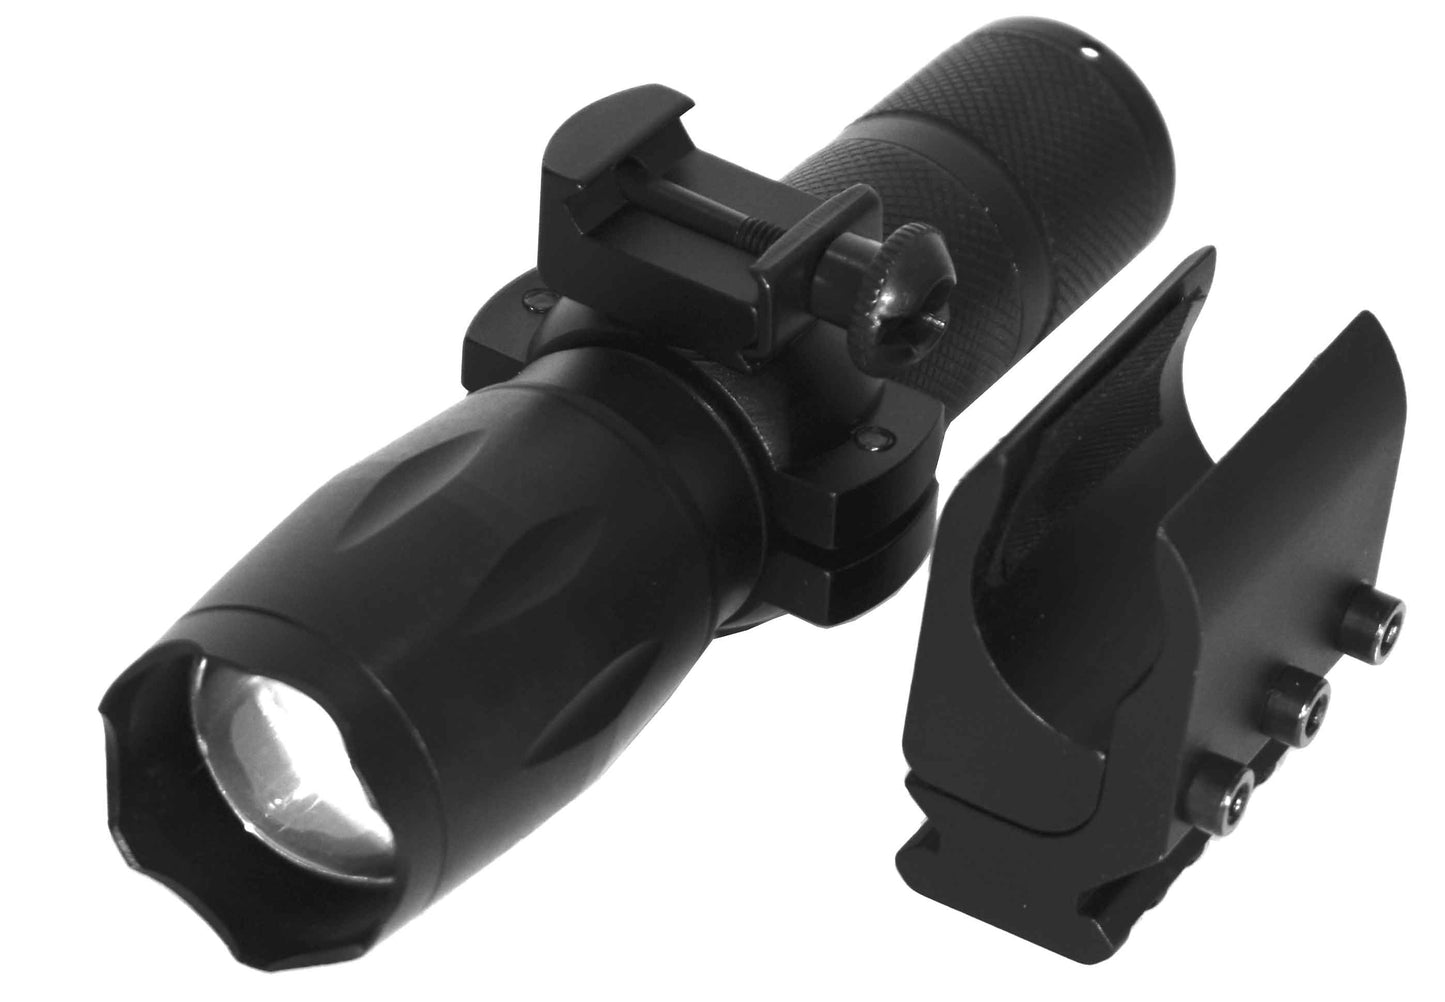 Tactical flashlight 1000 lumen with magazine tube mount compatible with 12 gauge pumps.